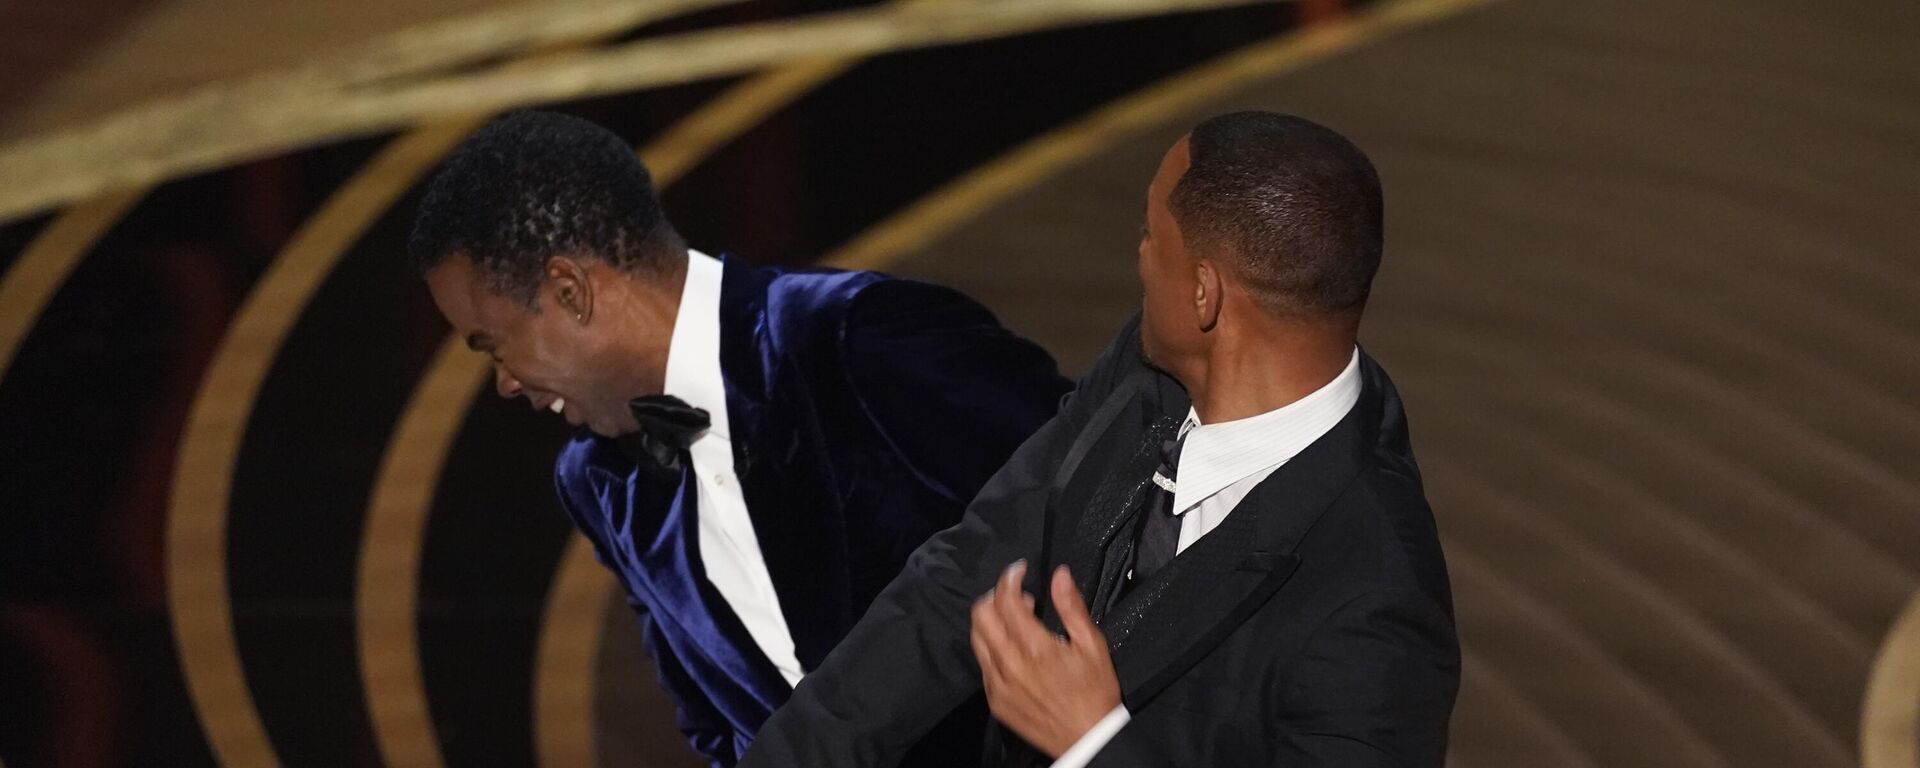 Will Smith, right, hits presenter Chris Rock on stage while presenting the award for best documentary feature at the Oscars on Sunday, March 27, 2022, at the Dolby Theatre in Los Angeles. - Sputnik International, 1920, 29.07.2022